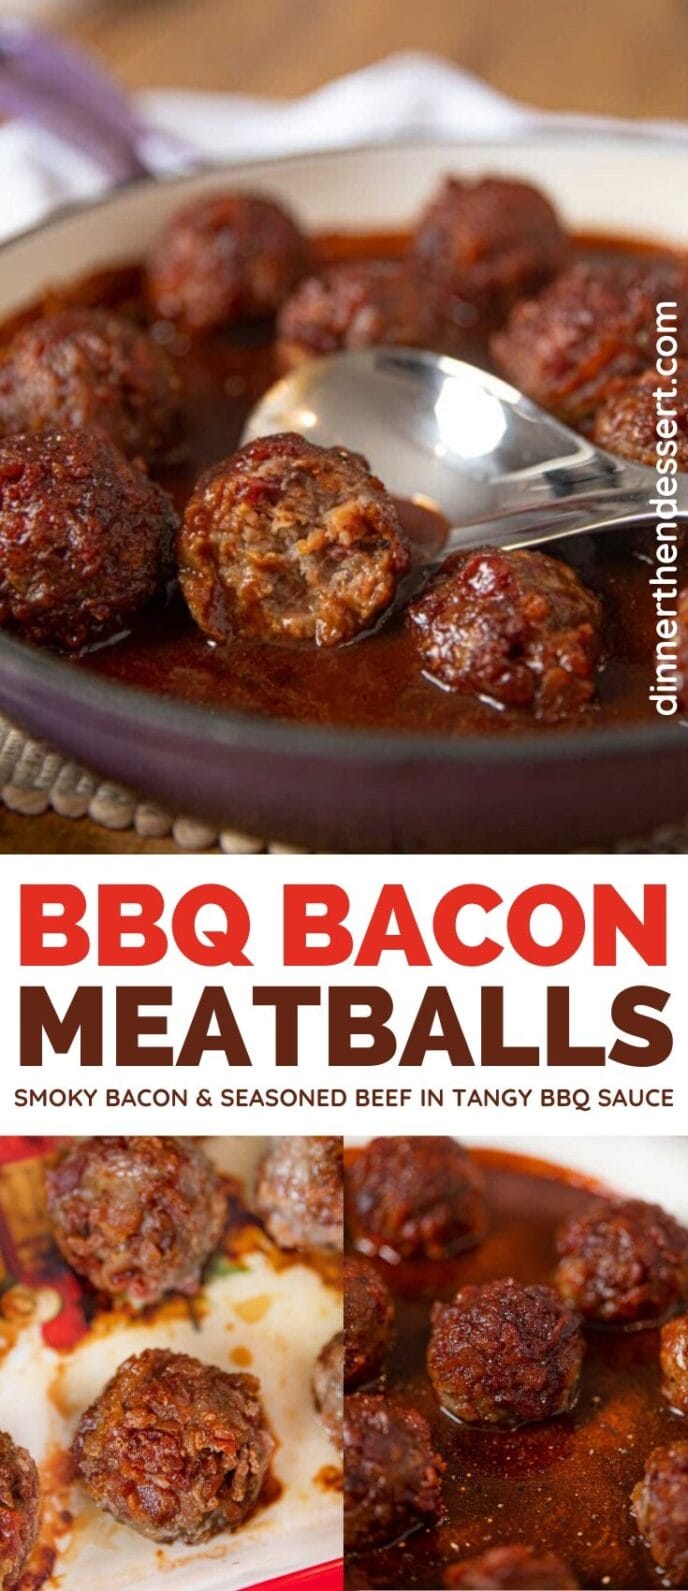 BBQ Bacon Meatballs collage